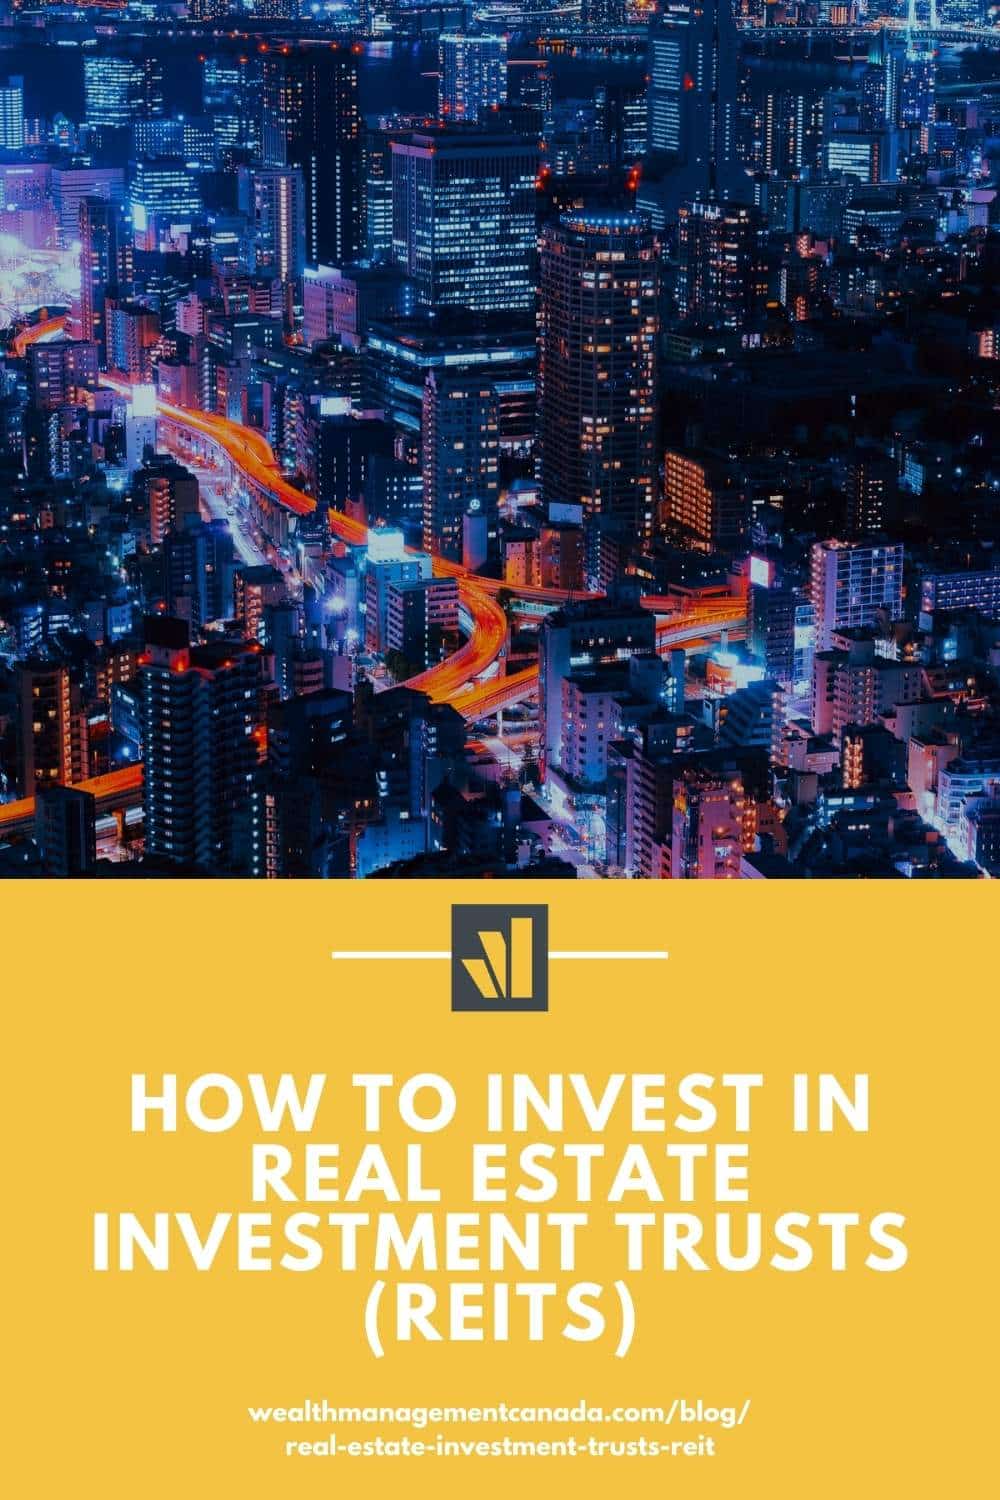 How to invest in real estate trust